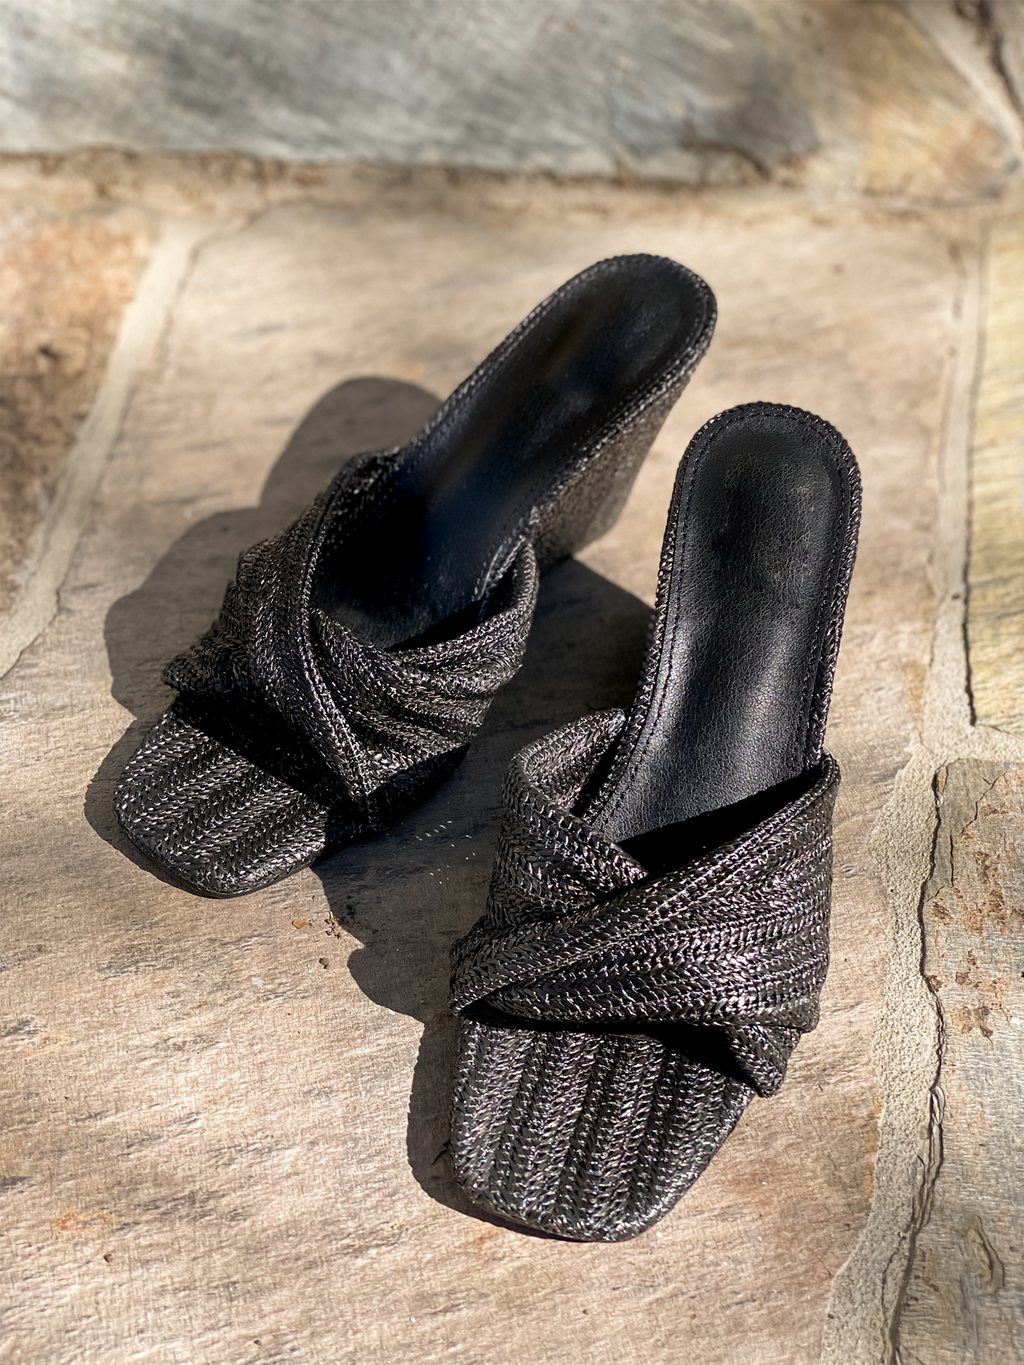 Jovie Wedge Sandal in Black - Final Sale - Stitch And Feather